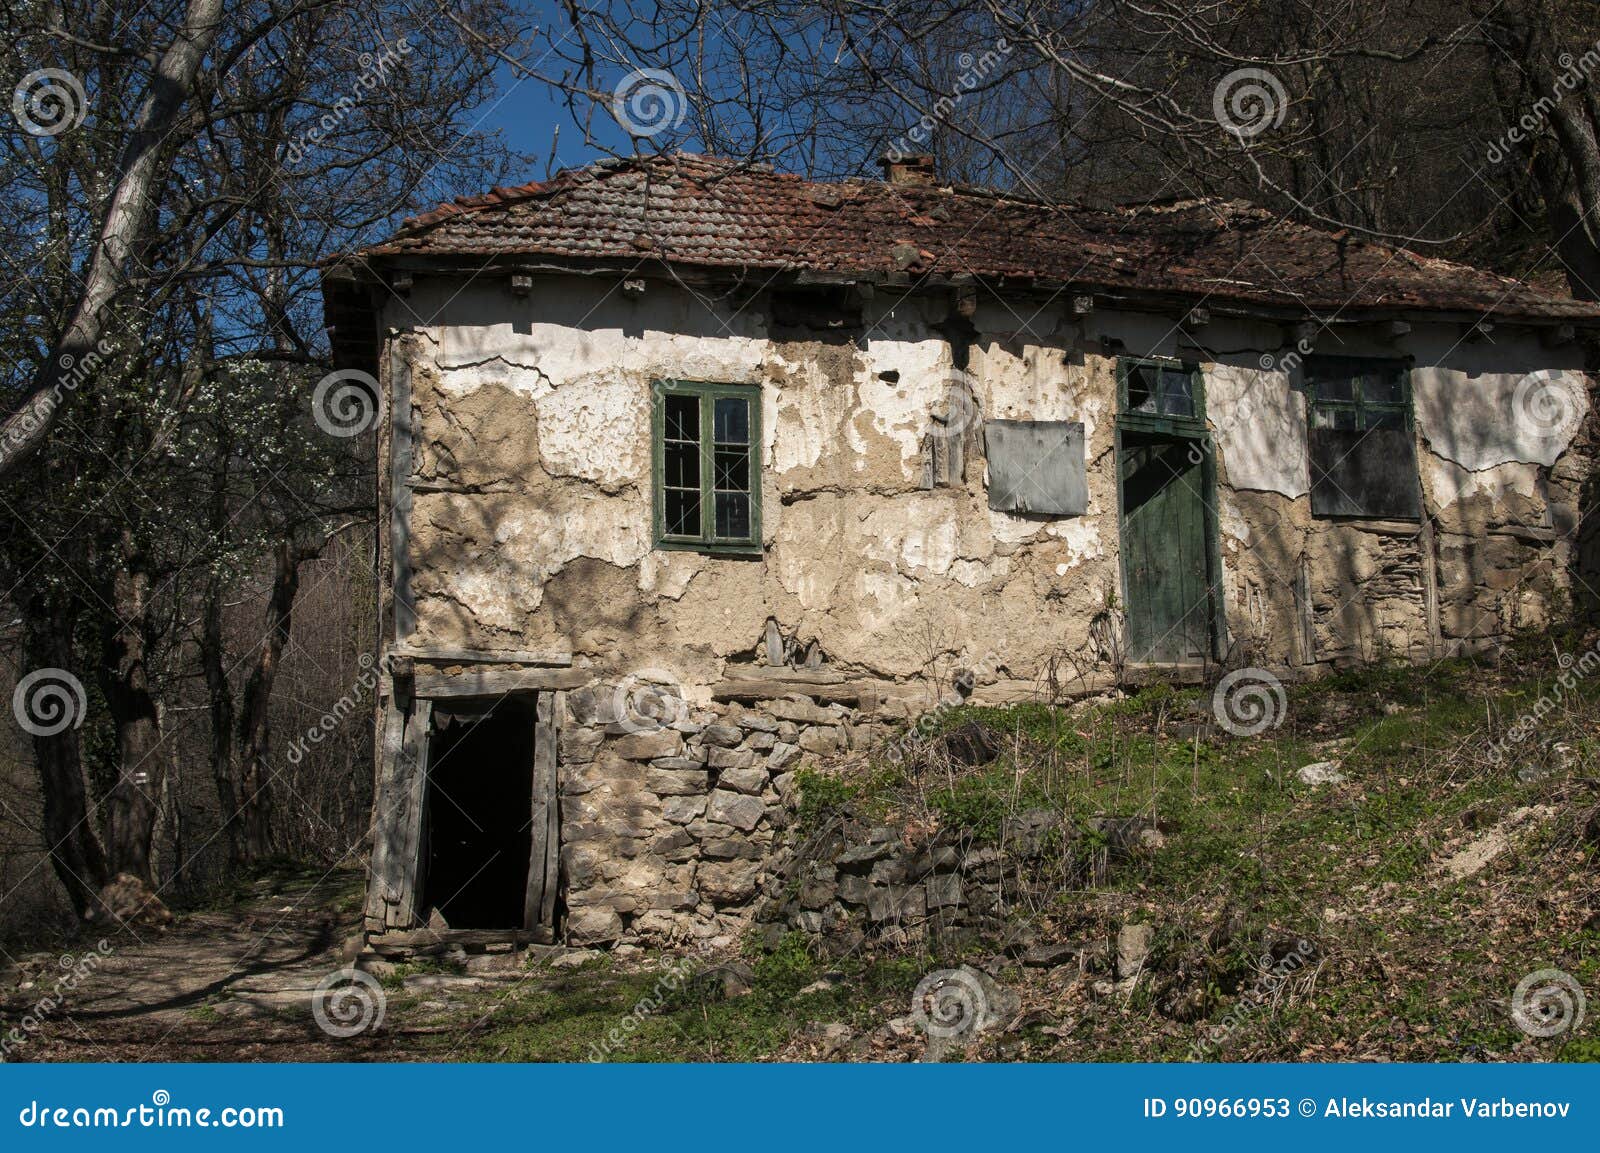 Old Abandoned House in Spring Time Stock Image - Image of door, rural ...